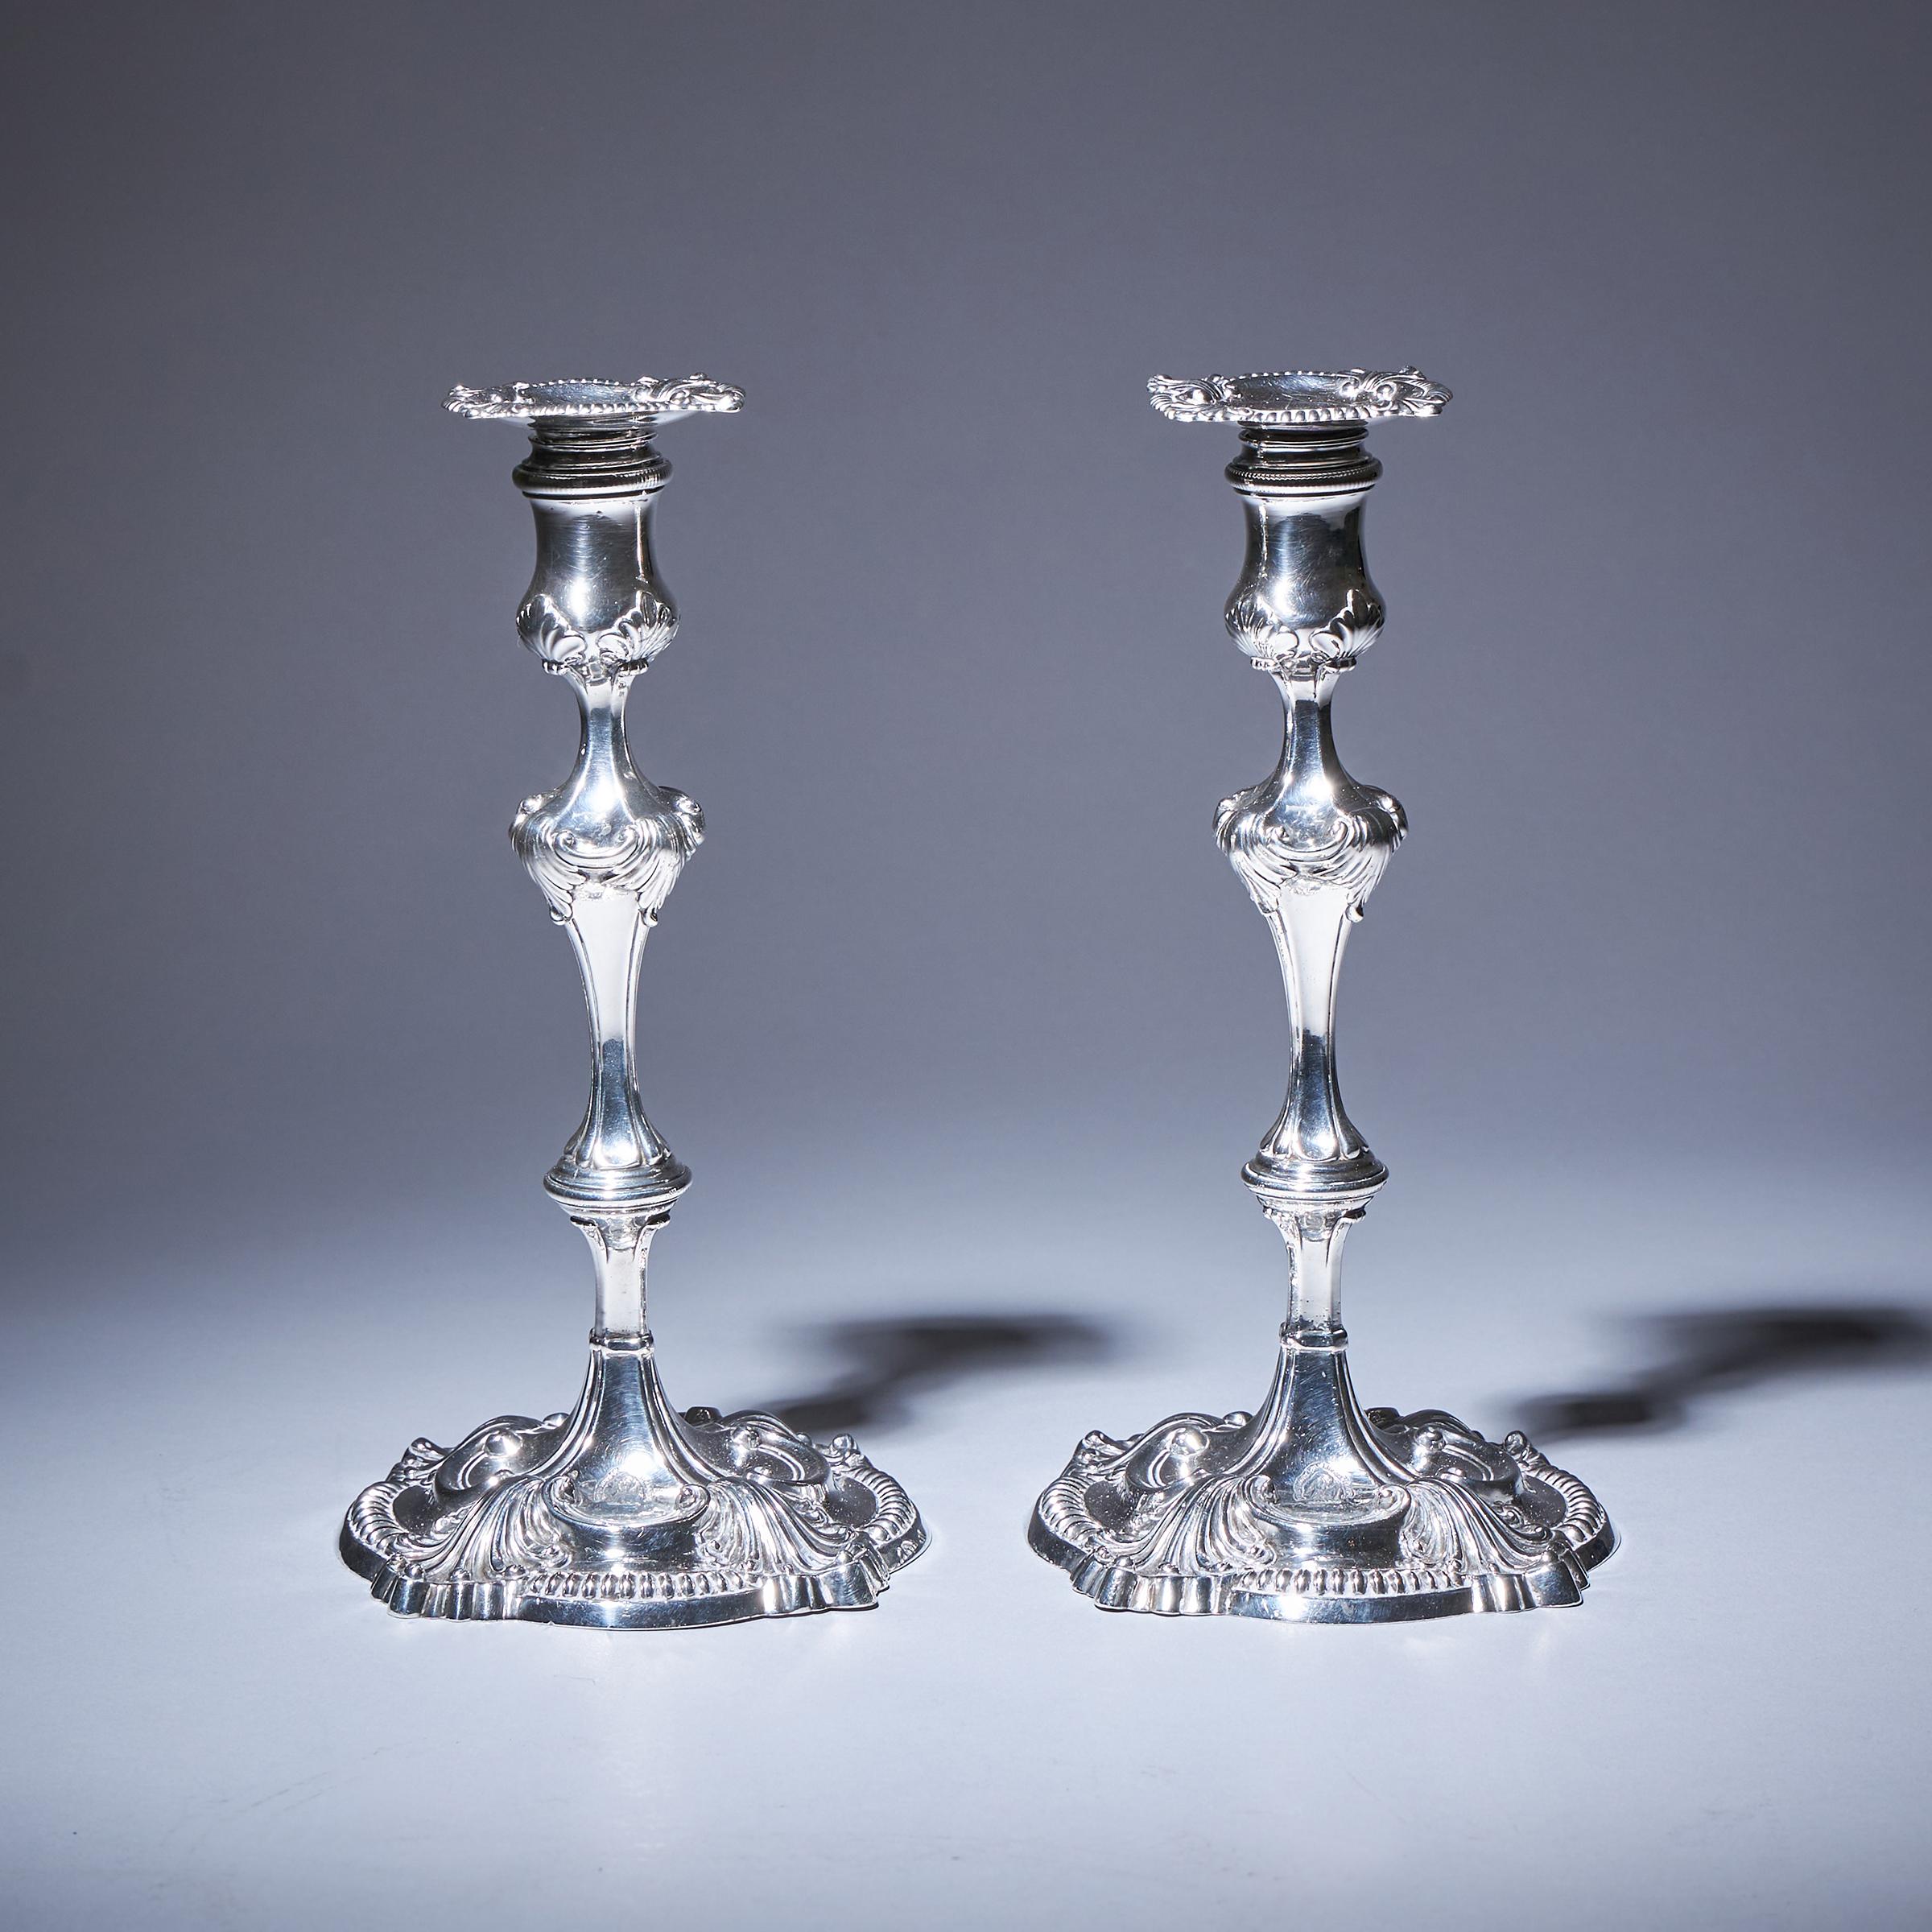 Rococo Pair of 18th Century George III Silver Candlesticks by David Bell, London, 1762 For Sale